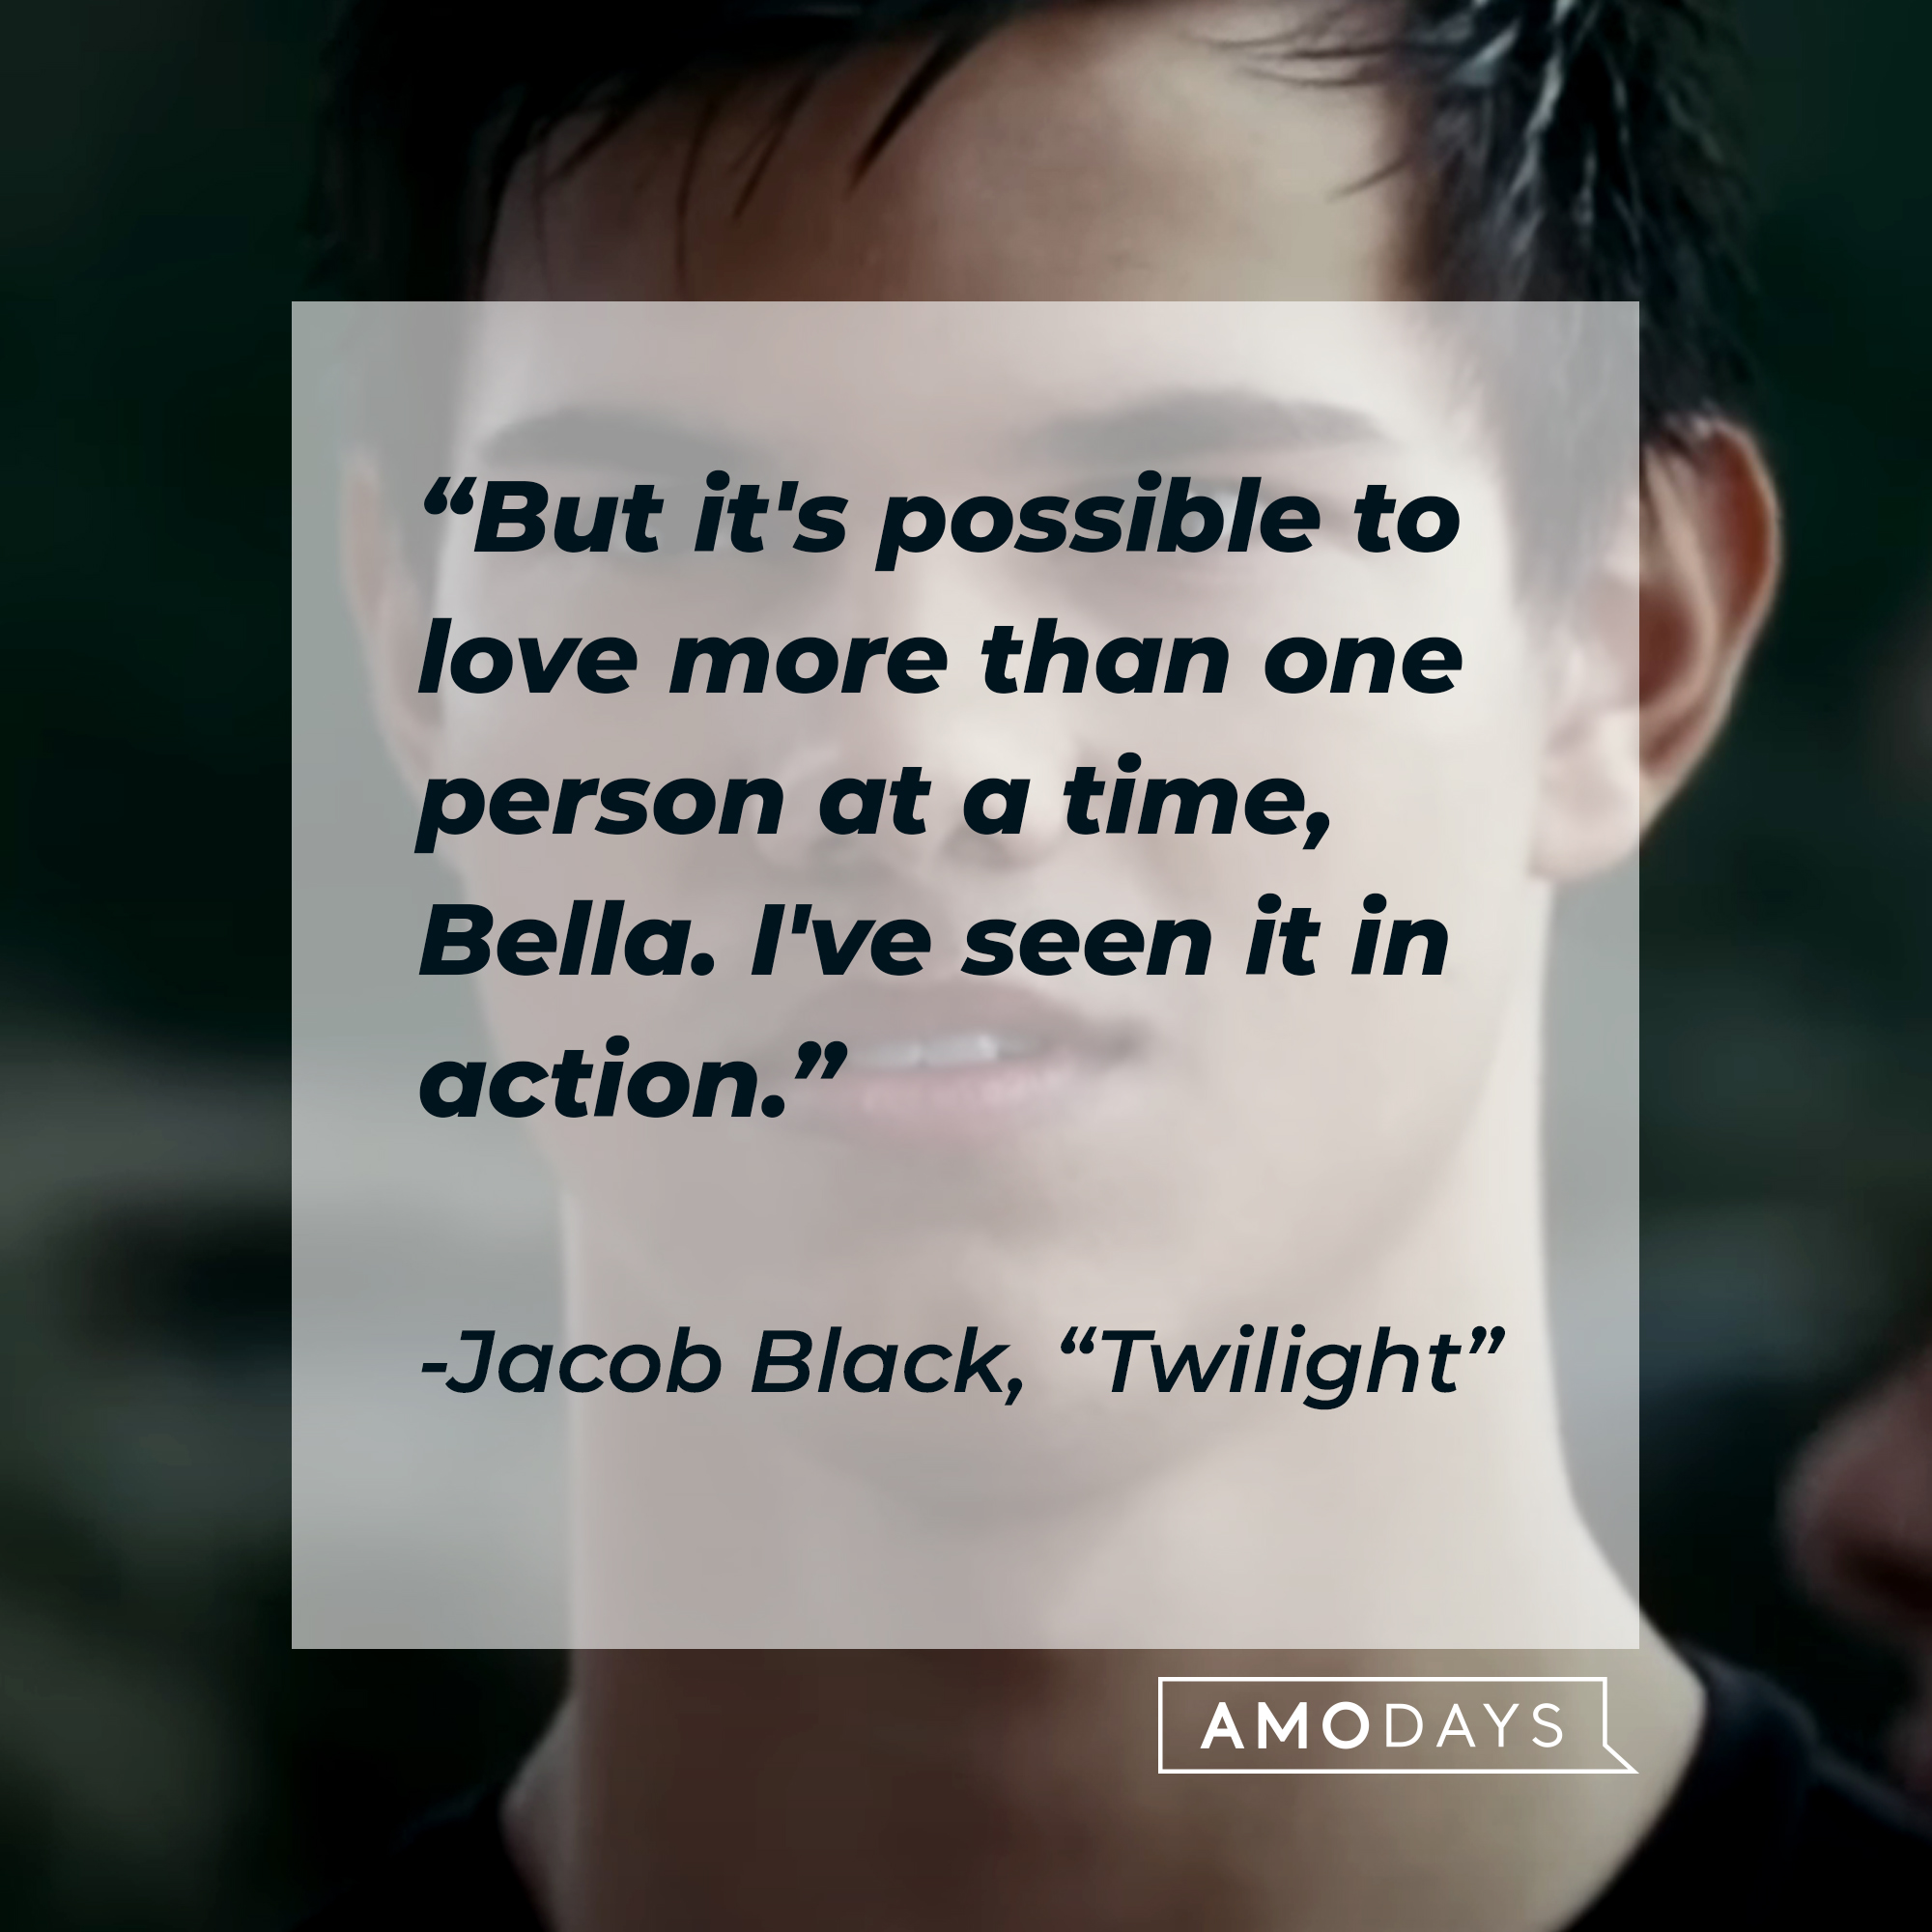 Image of Jacob Black with his quote in "Twilight:" “But it's possible to love more than one person at a time, Bella. I've seen it in action.” | Source: Facebook.com/twilight